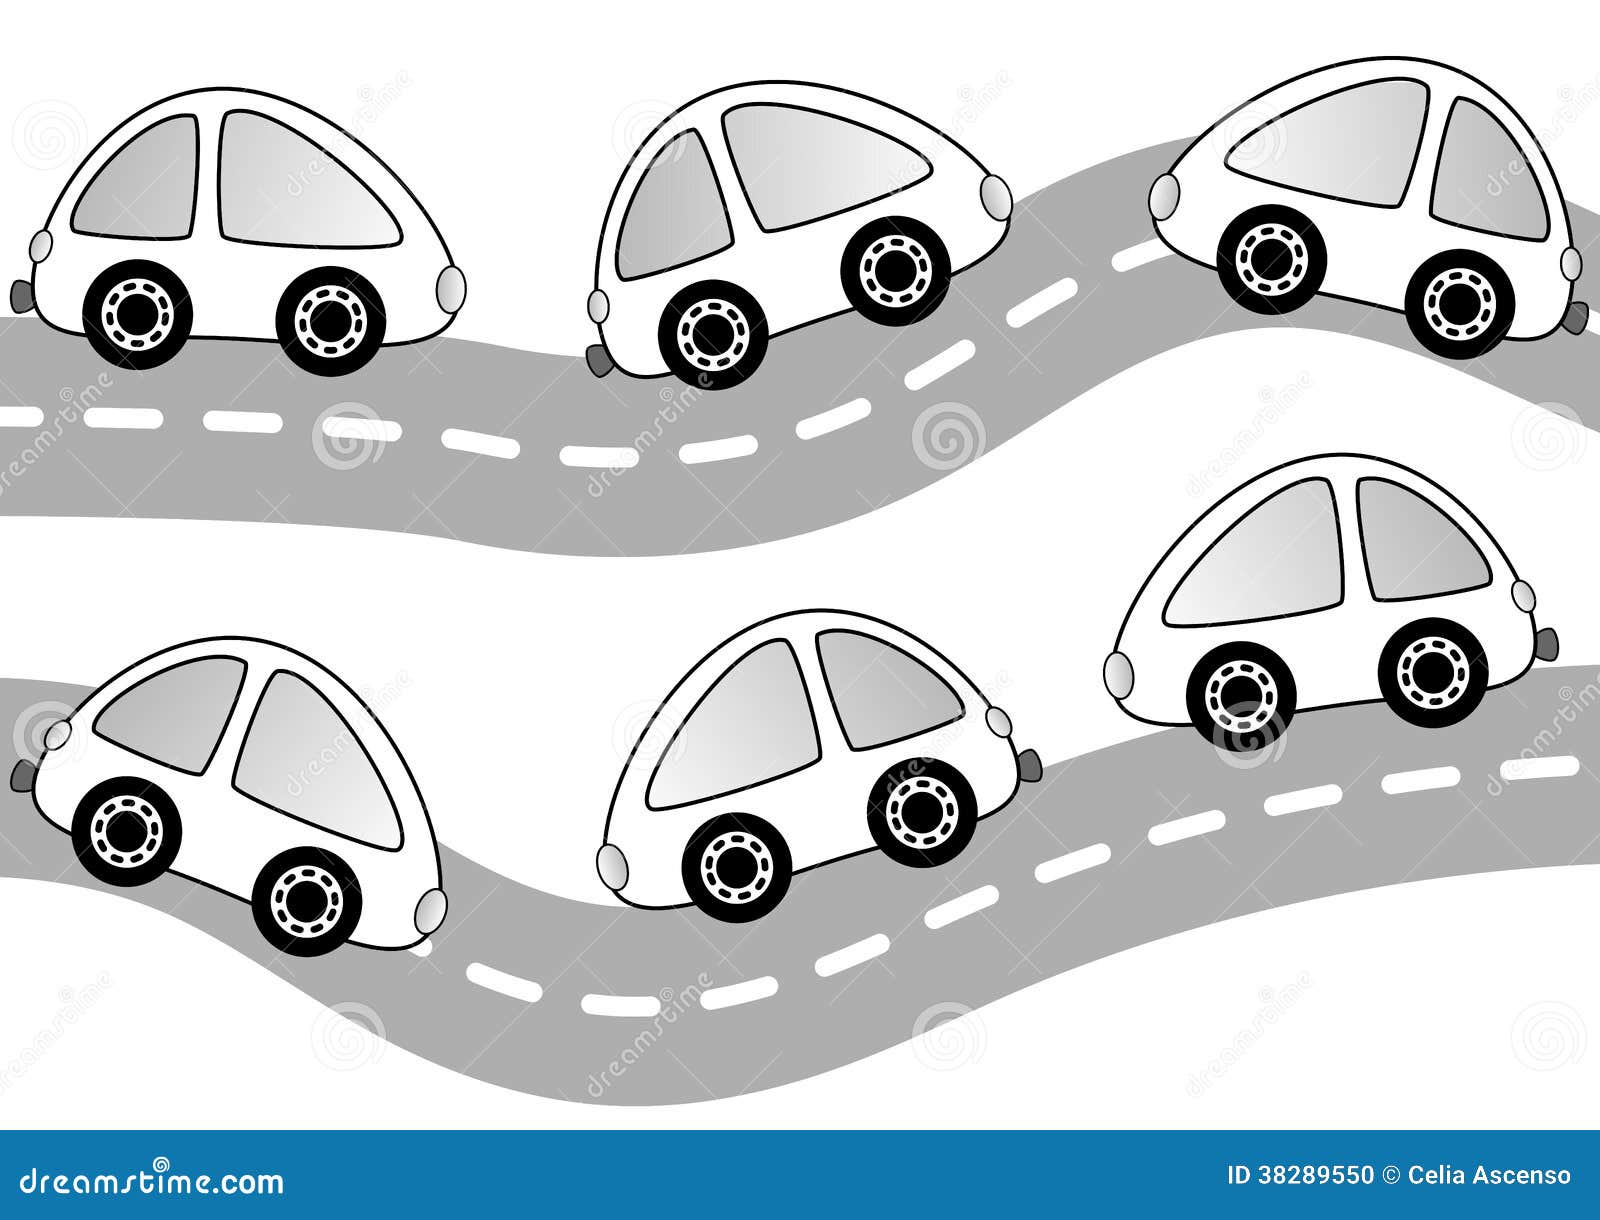 Download Cars On The Road Coloring Page Stock Illustration ...